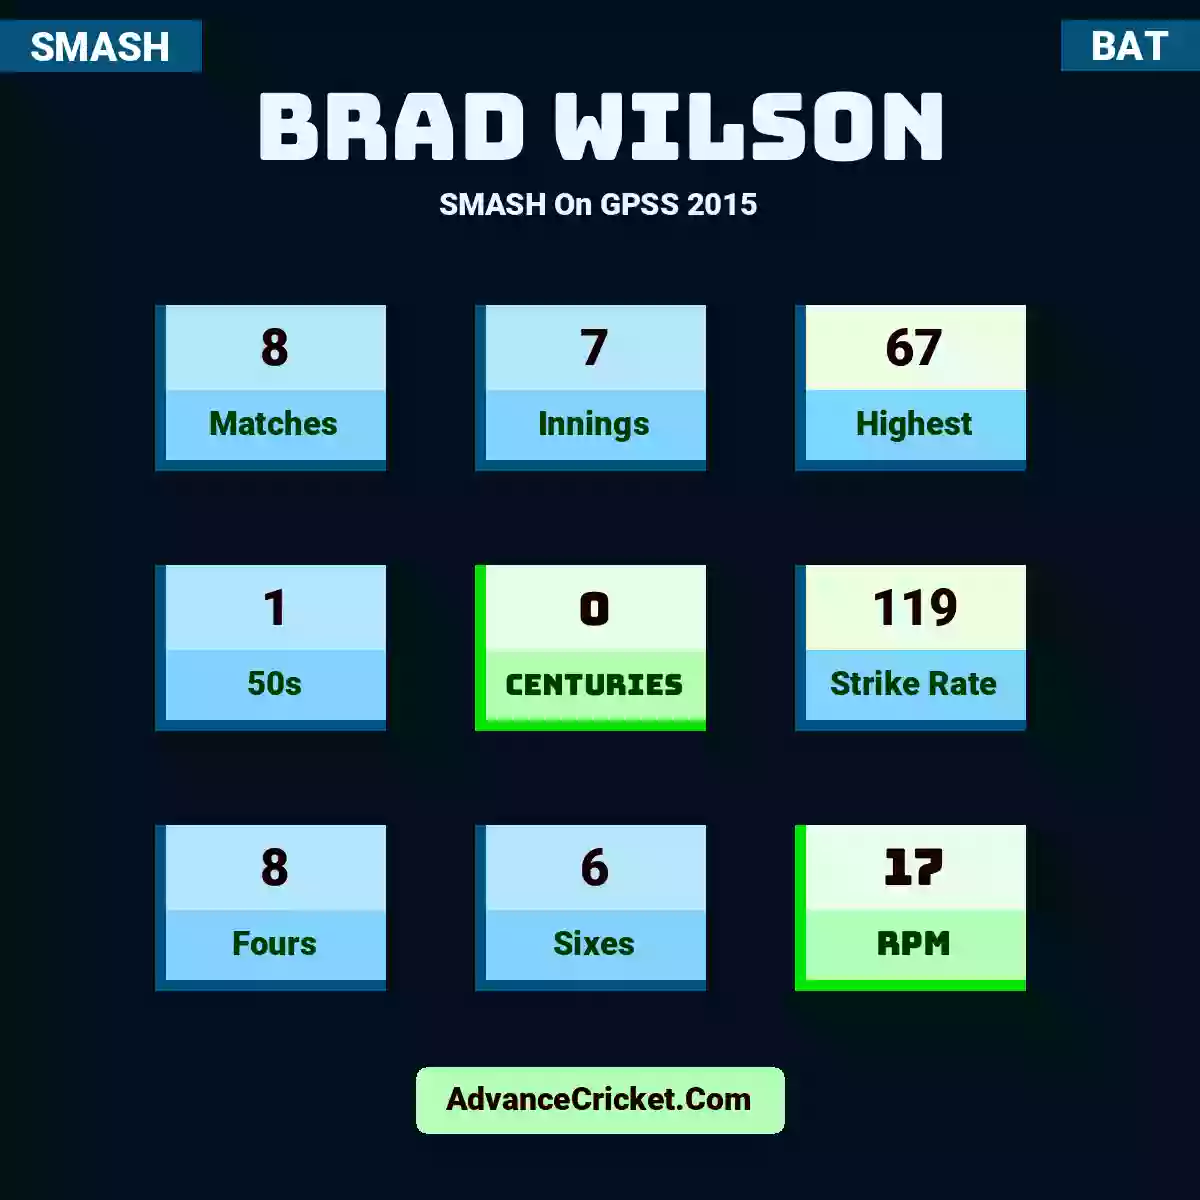 Brad Wilson SMASH  On GPSS 2015, Brad Wilson played 8 matches, scored 67 runs as highest, 1 half-centuries, and 0 centuries, with a strike rate of 119. B.Wilson hit 8 fours and 6 sixes, with an RPM of 17.